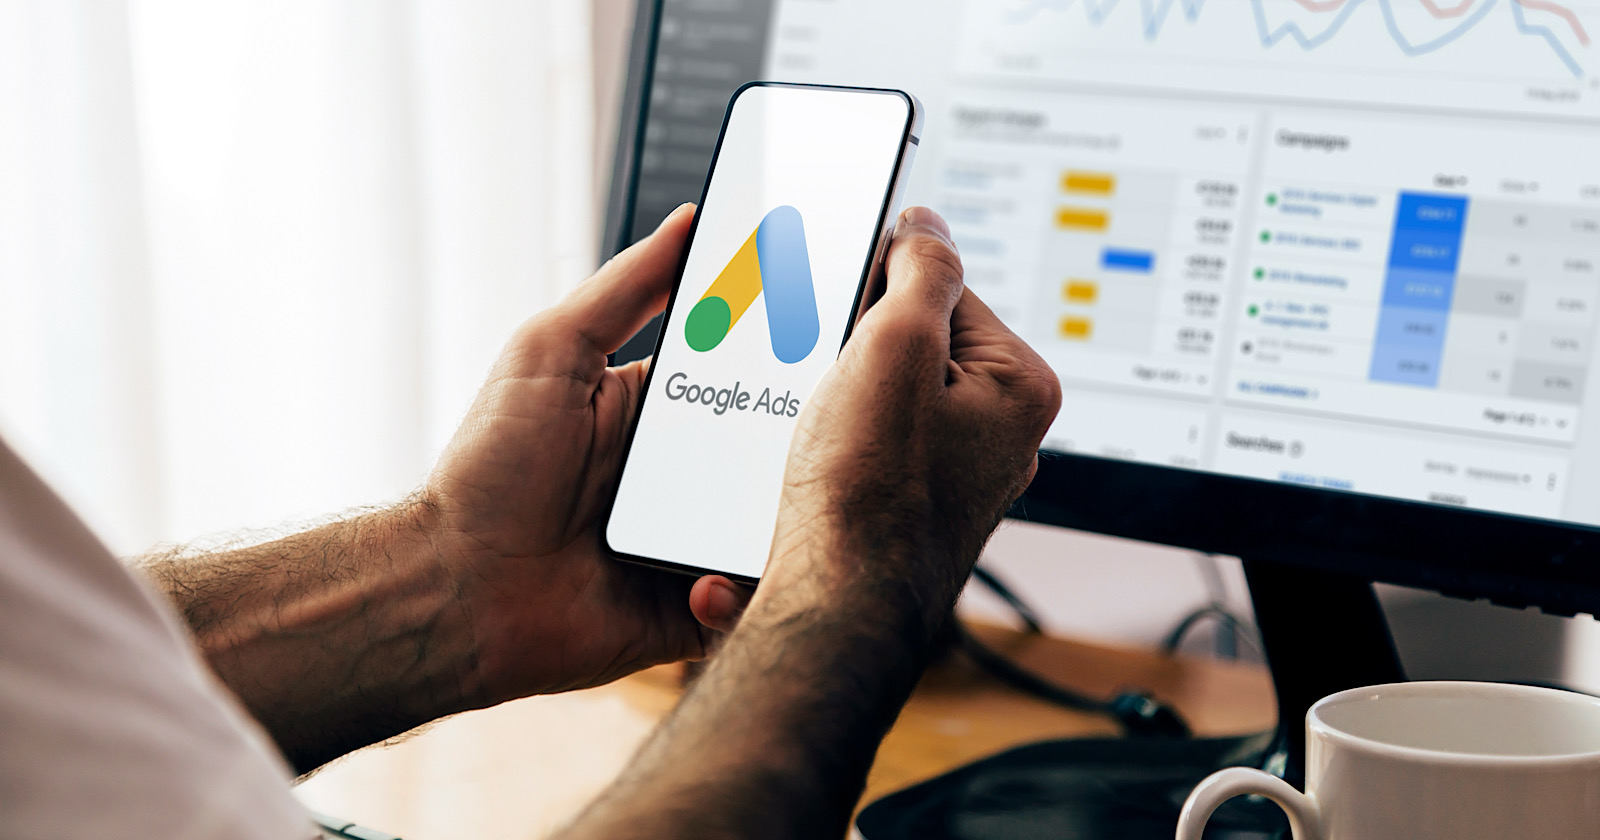 Google updates definition of “top ads” in search results